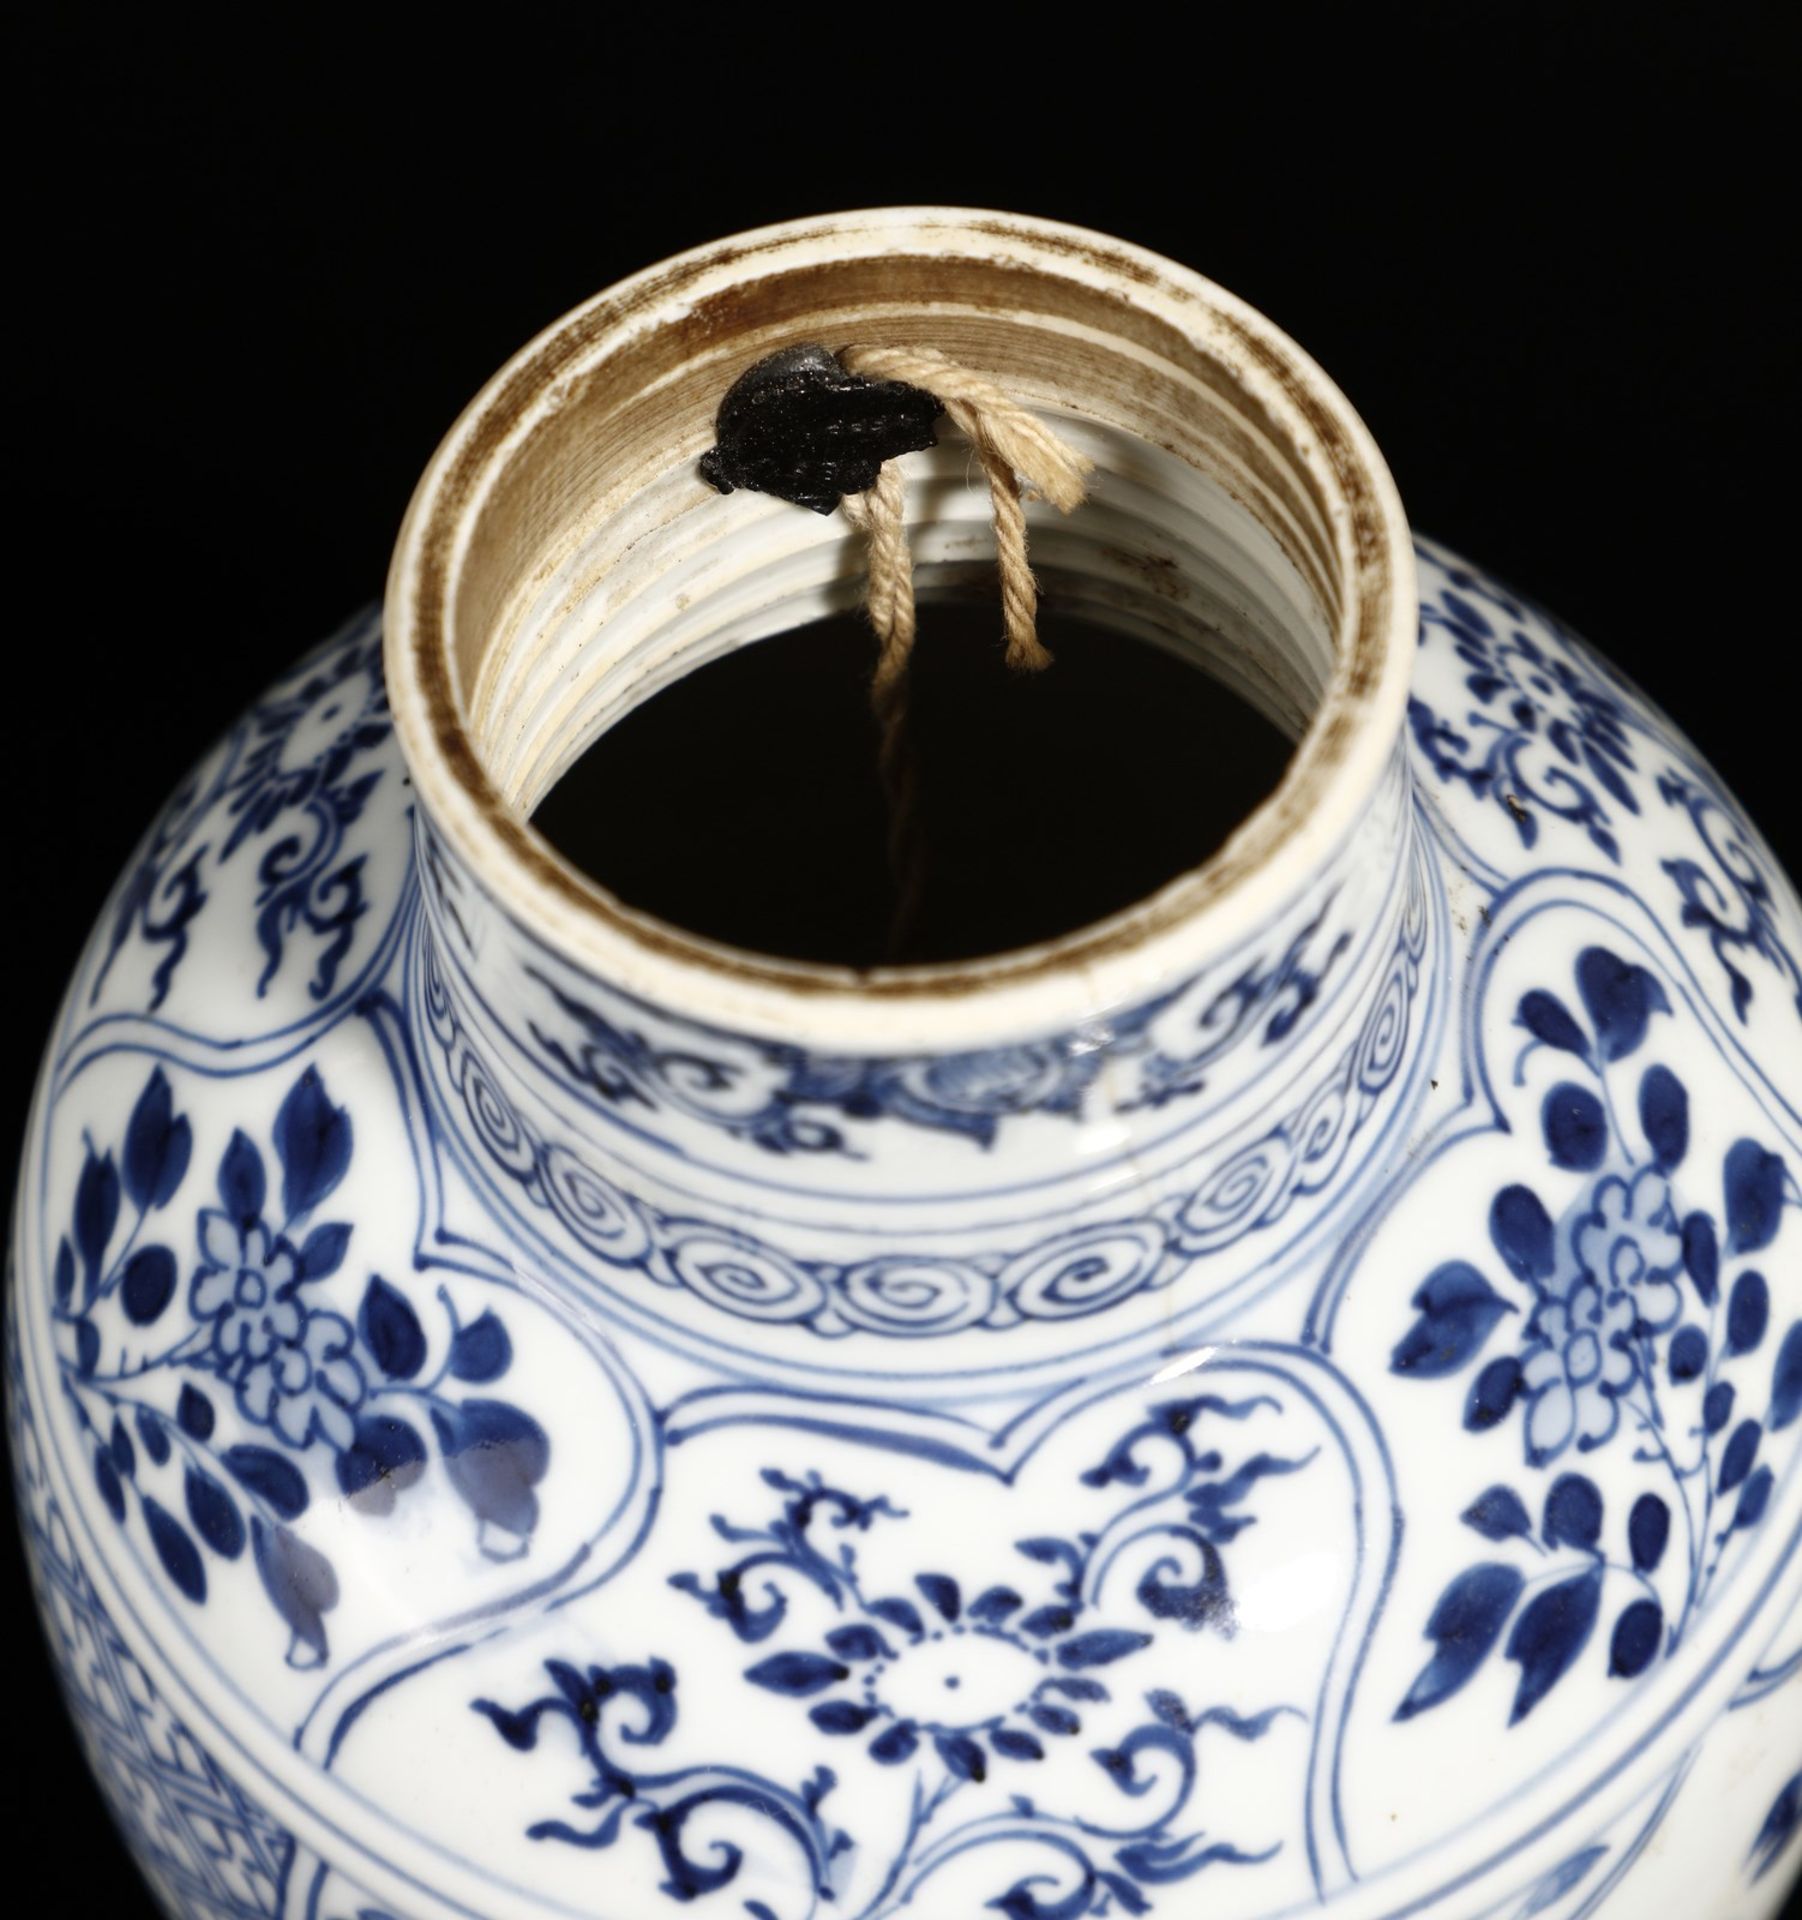 Arte Cinese  A blue and white porcelain baluster vase China, Qing dynasty, 17th century . - Bild 3 aus 5